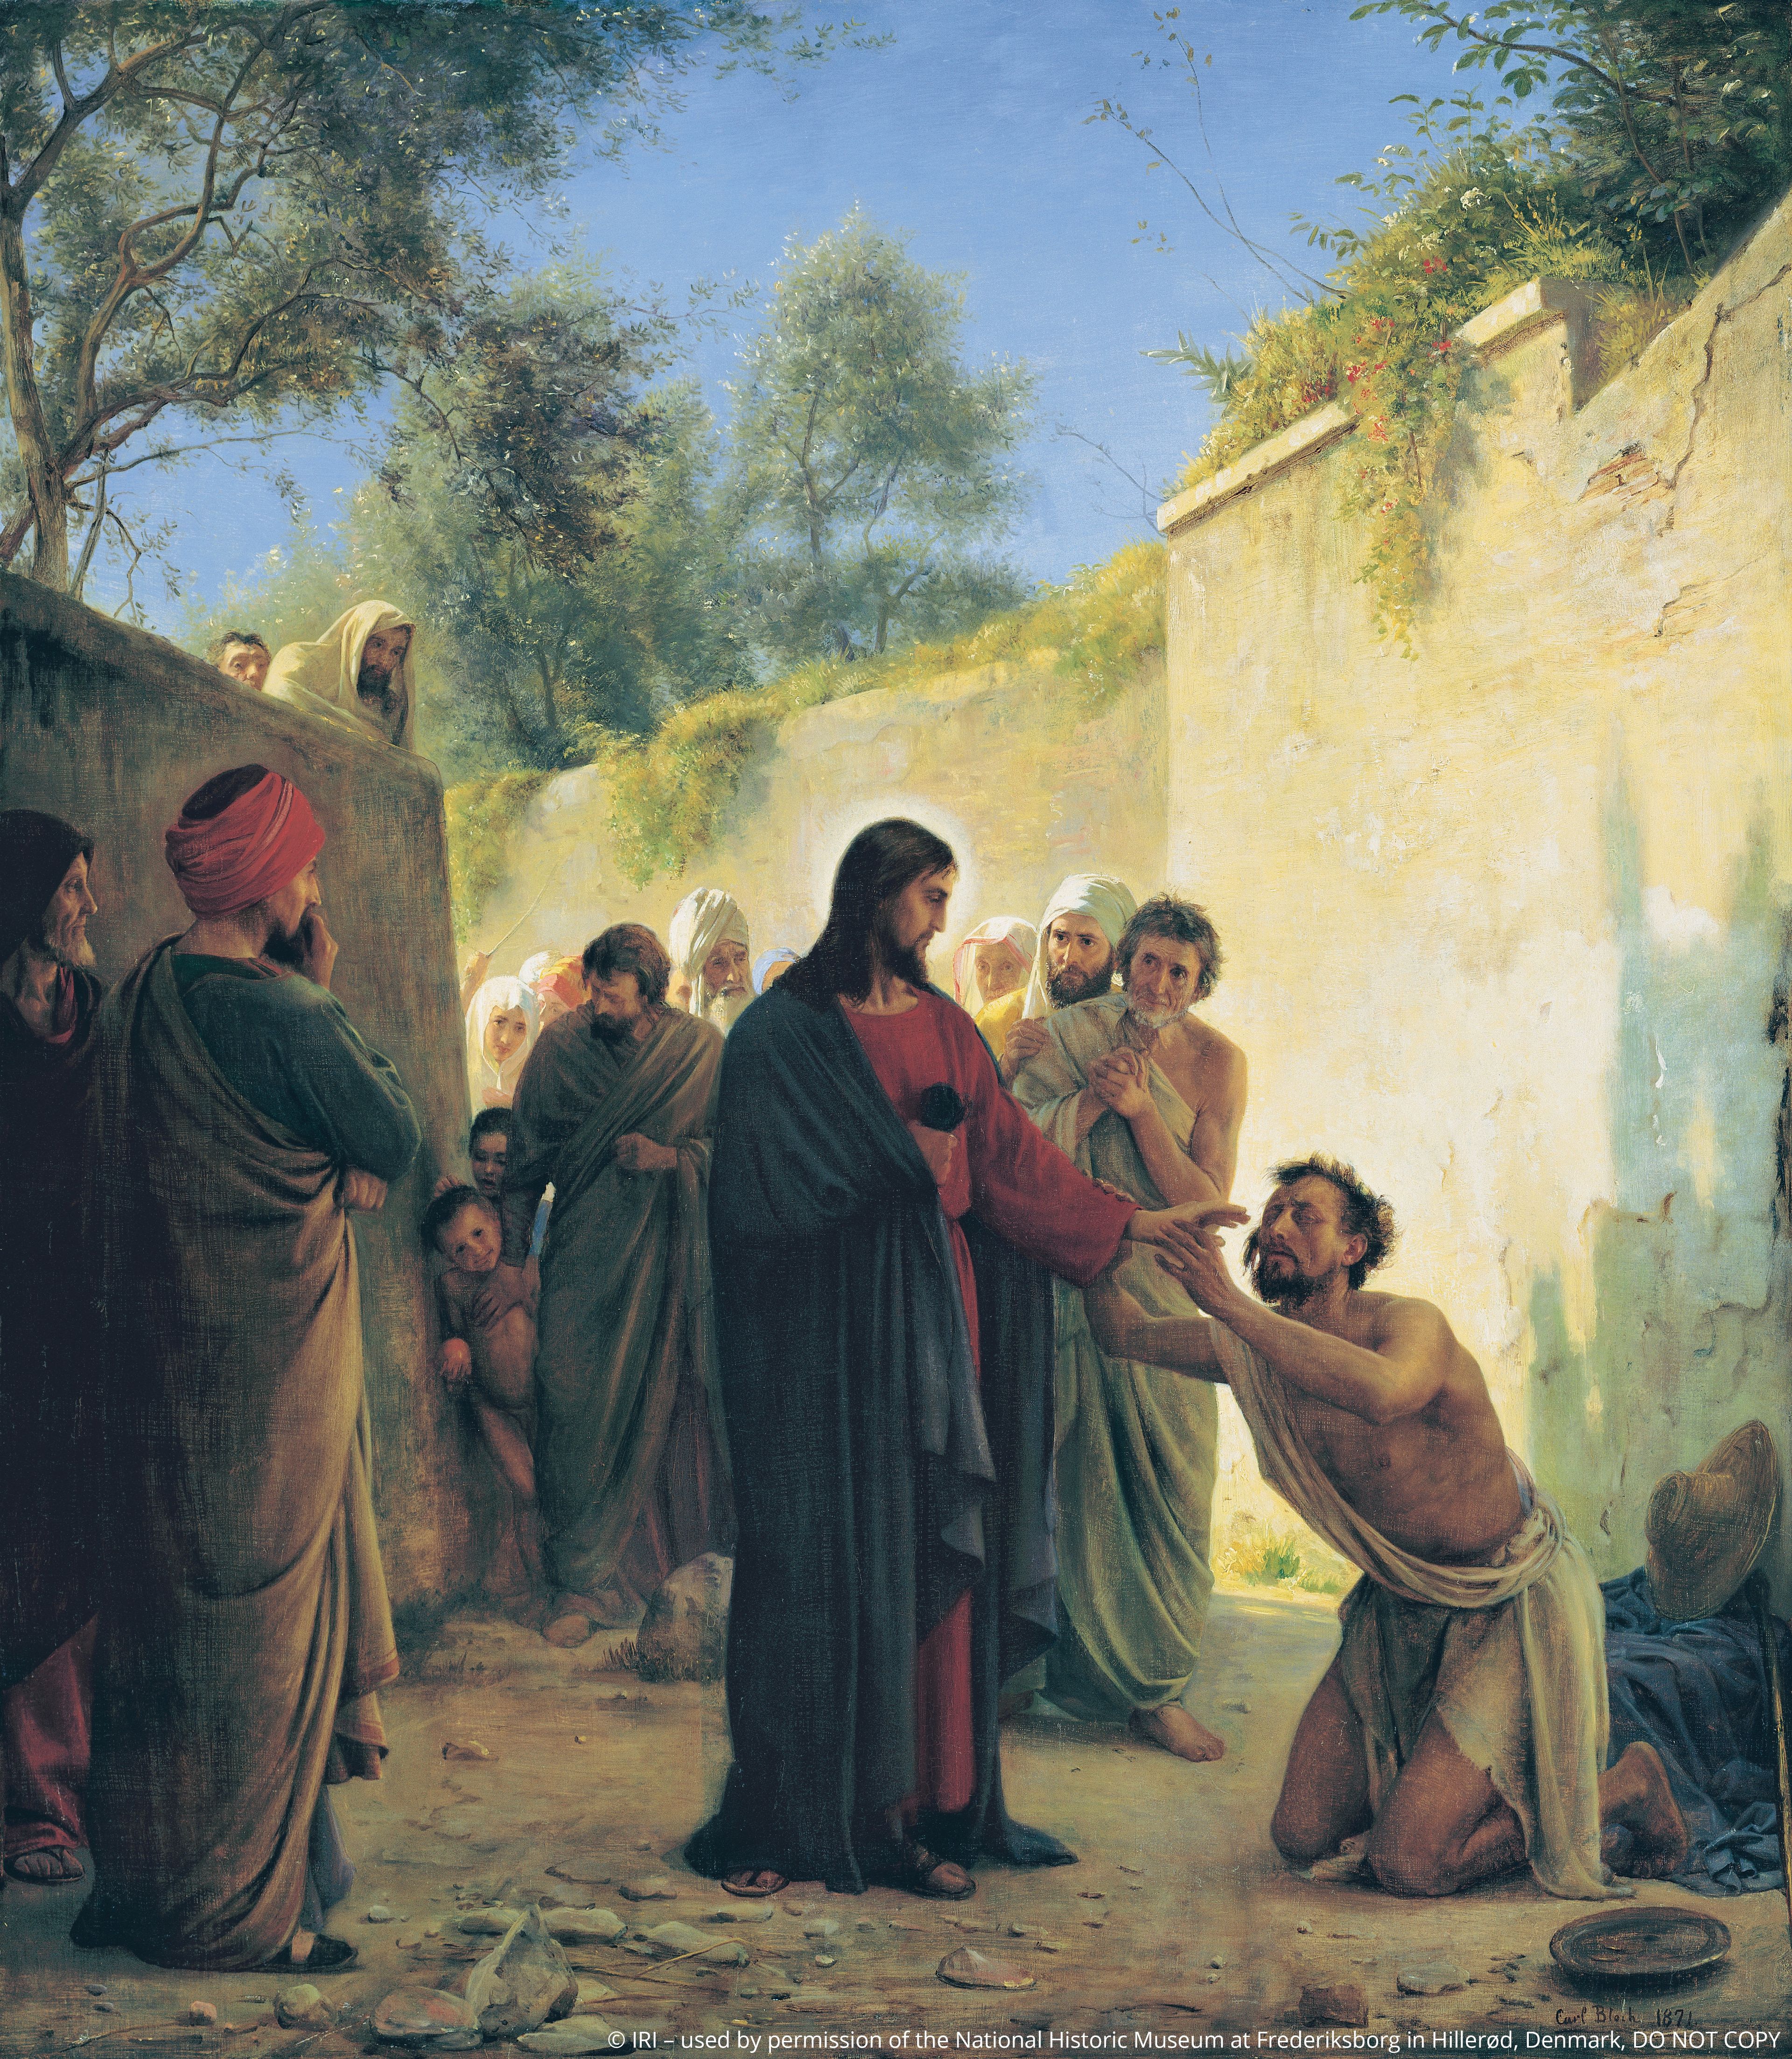 Jesus Healing the Blind (Healing the Blind Man), by Carl Heinrich Bloch; © IRI, used by permission of the National Historic Museum at Frederiksborg in Hillerød, Denmark. DO NOT COPY. This asset is for Church use and online viewing only.